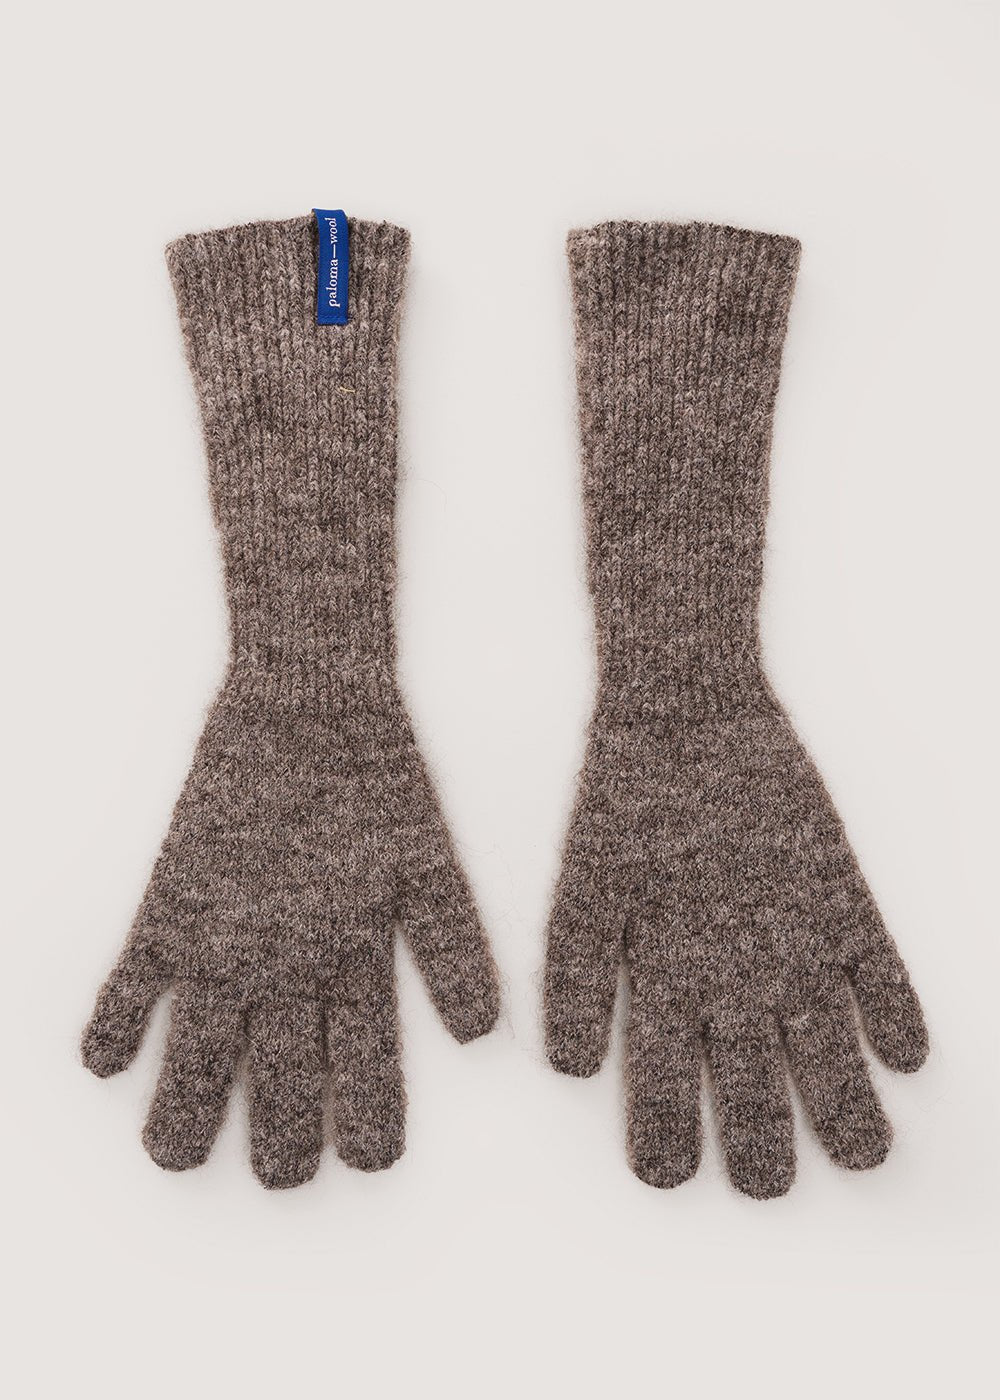 Peter Gloves in Taupe by PALOMA WOOL